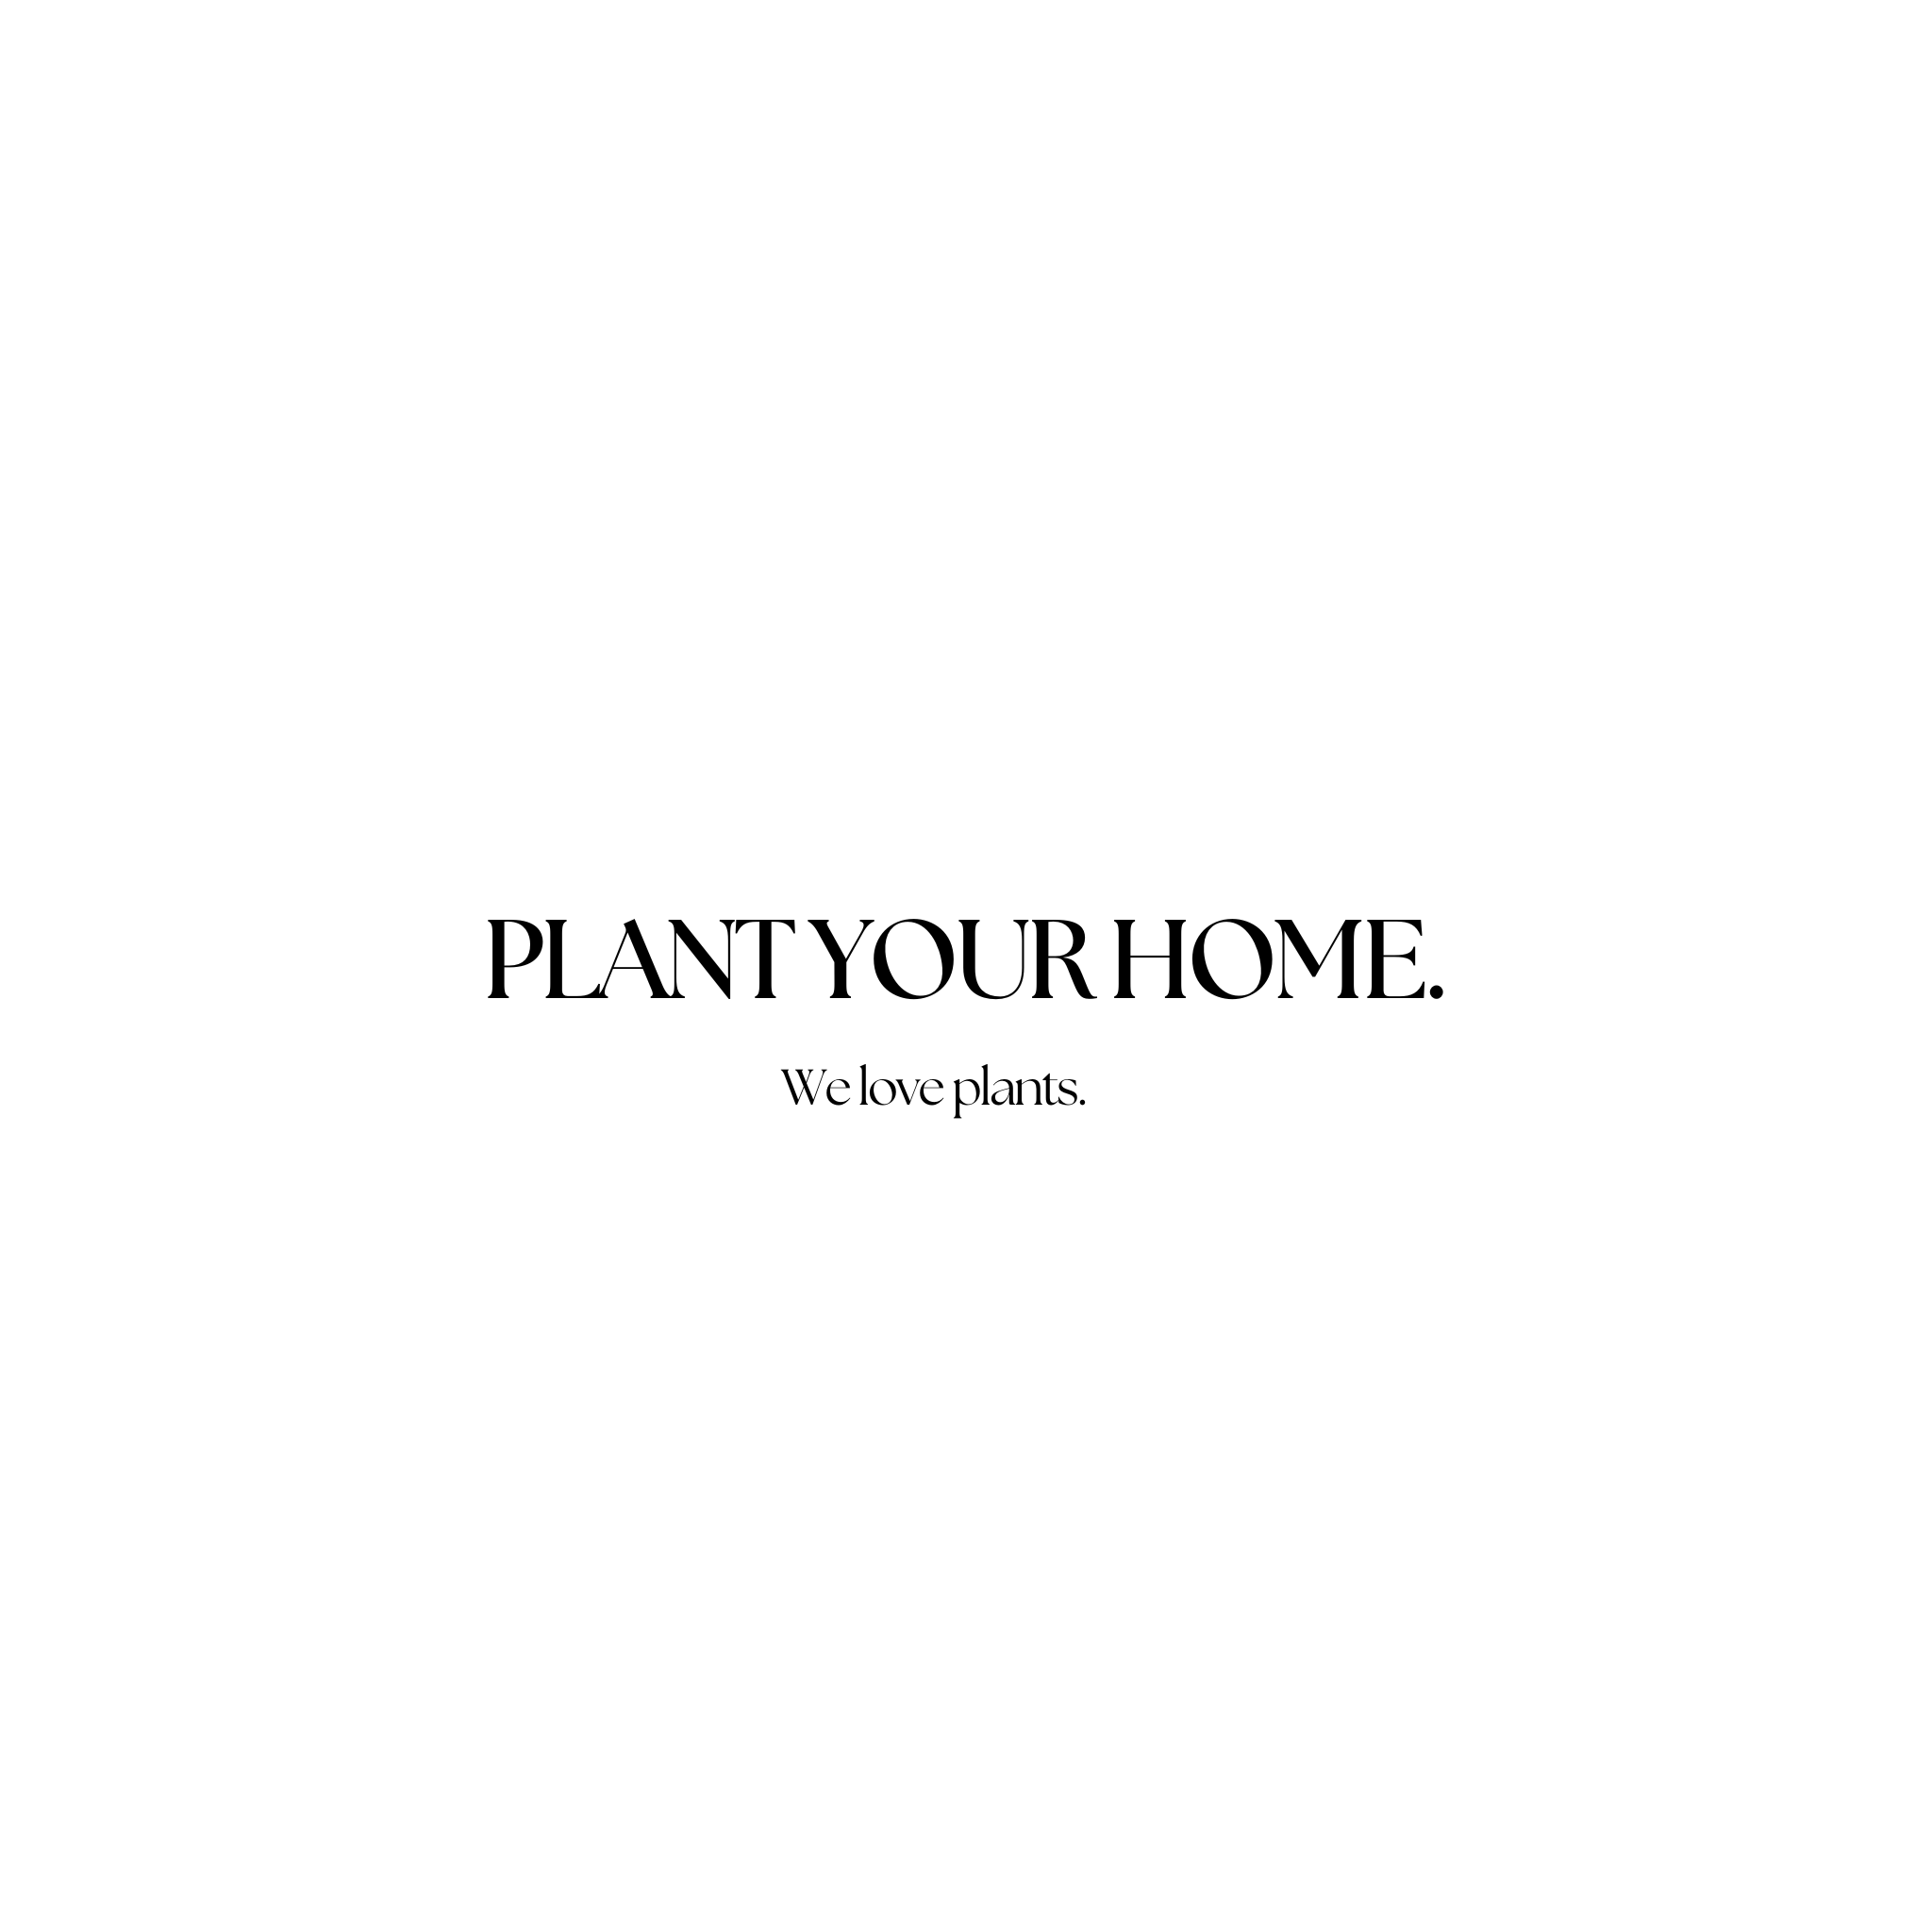 PLANT YOUR HOME